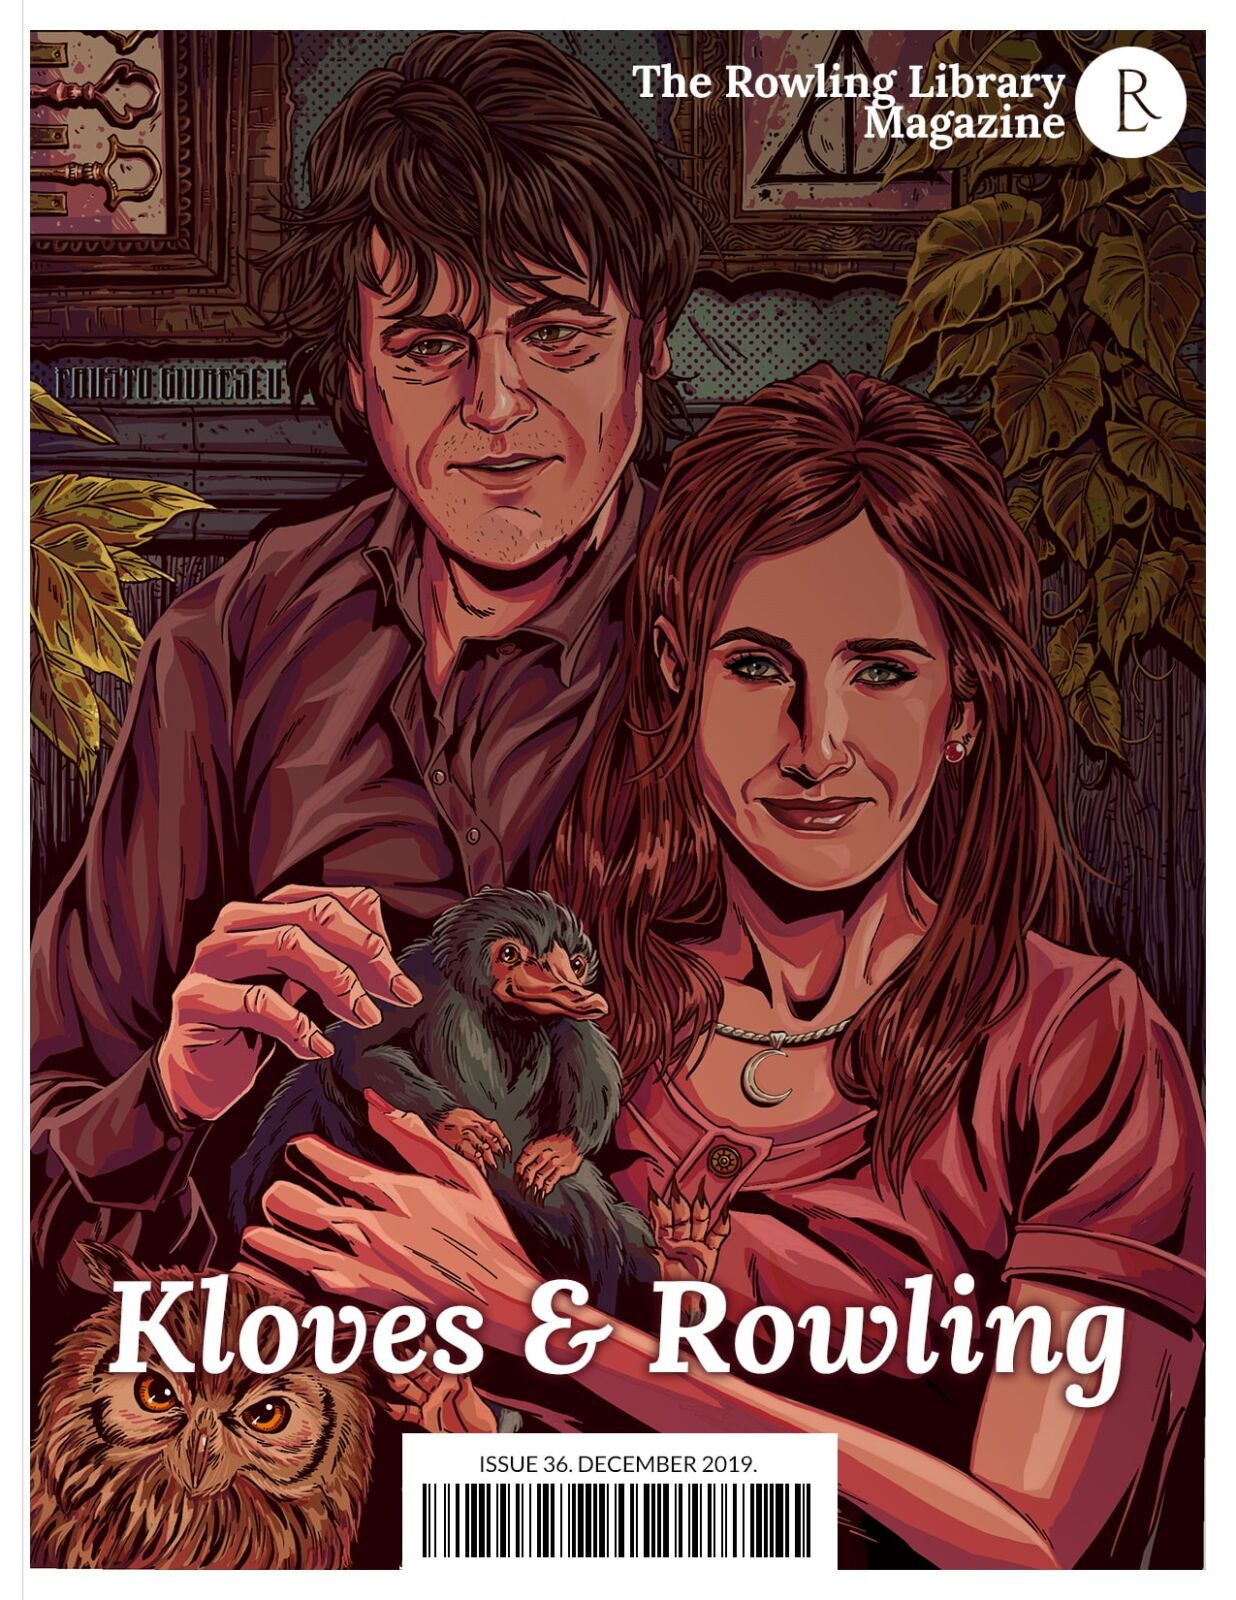 The Rowling Library Magazine #36 (December 2019): Kloves & Rowling